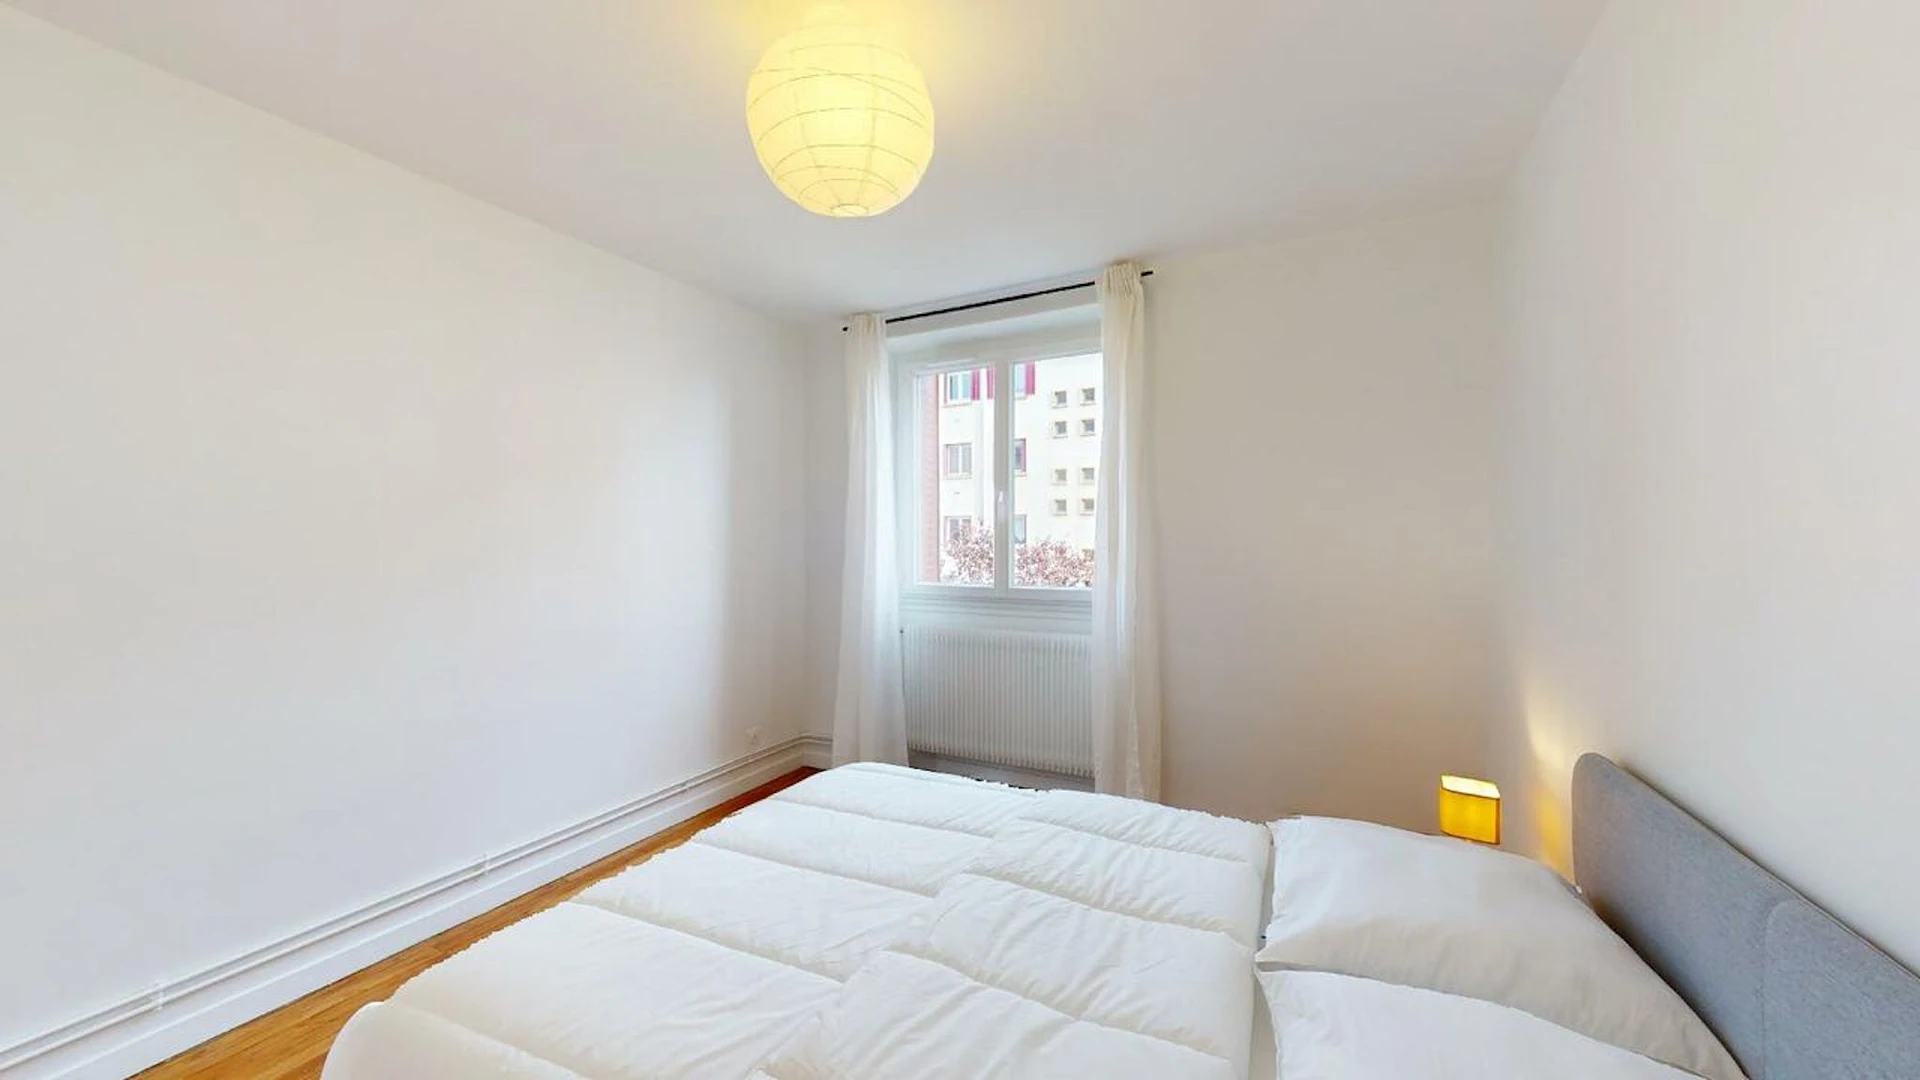 Two bedroom accommodation in Dijon